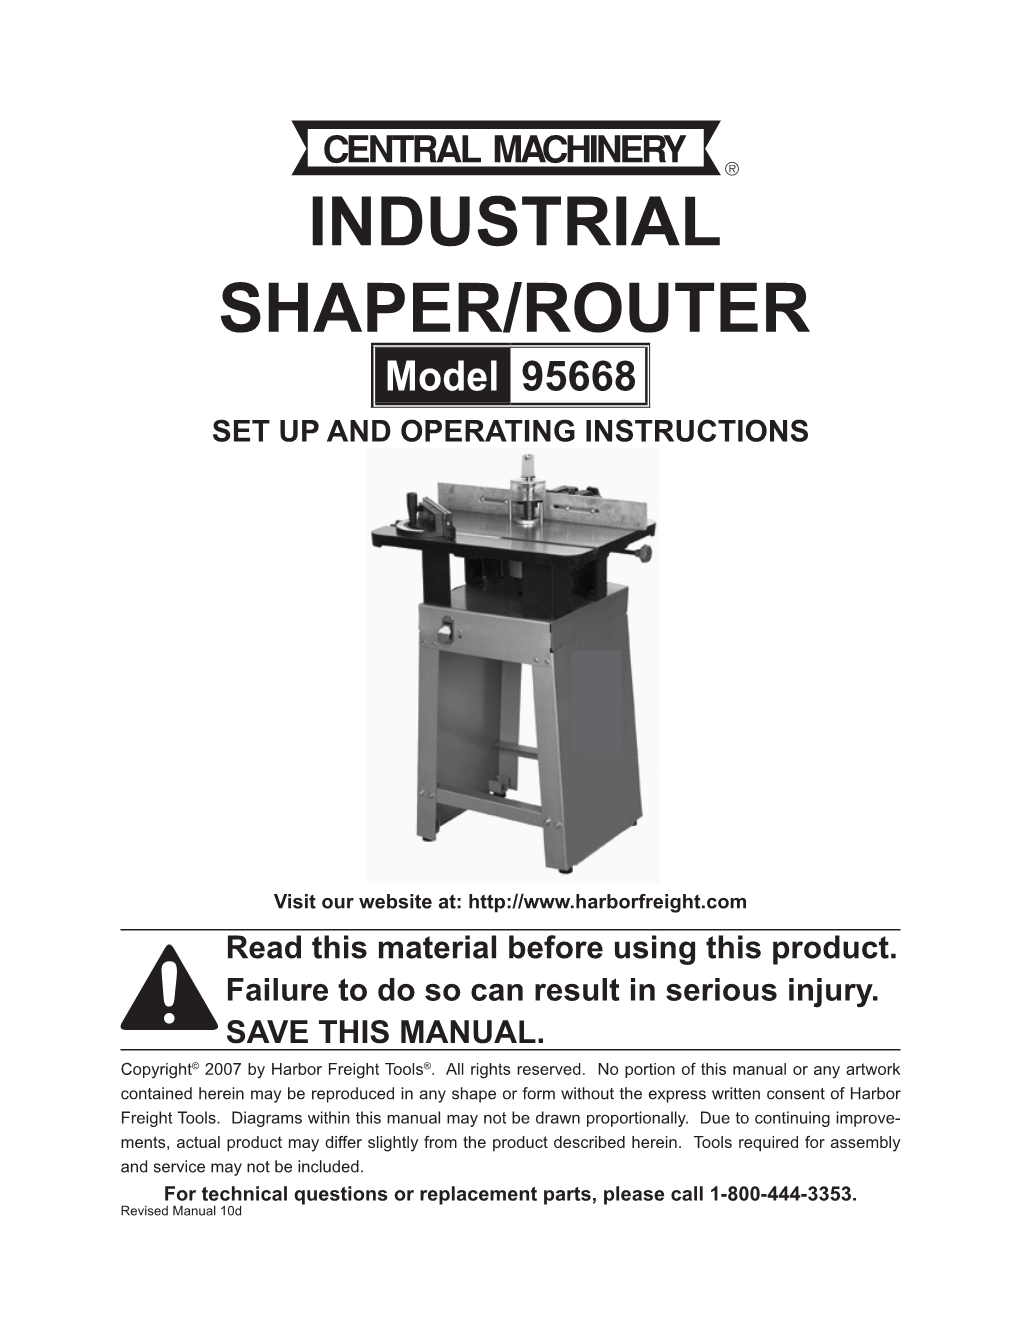 INDUSTRIAL SHAPER/ROUTER Model 95668 Set up and Operating Instructions